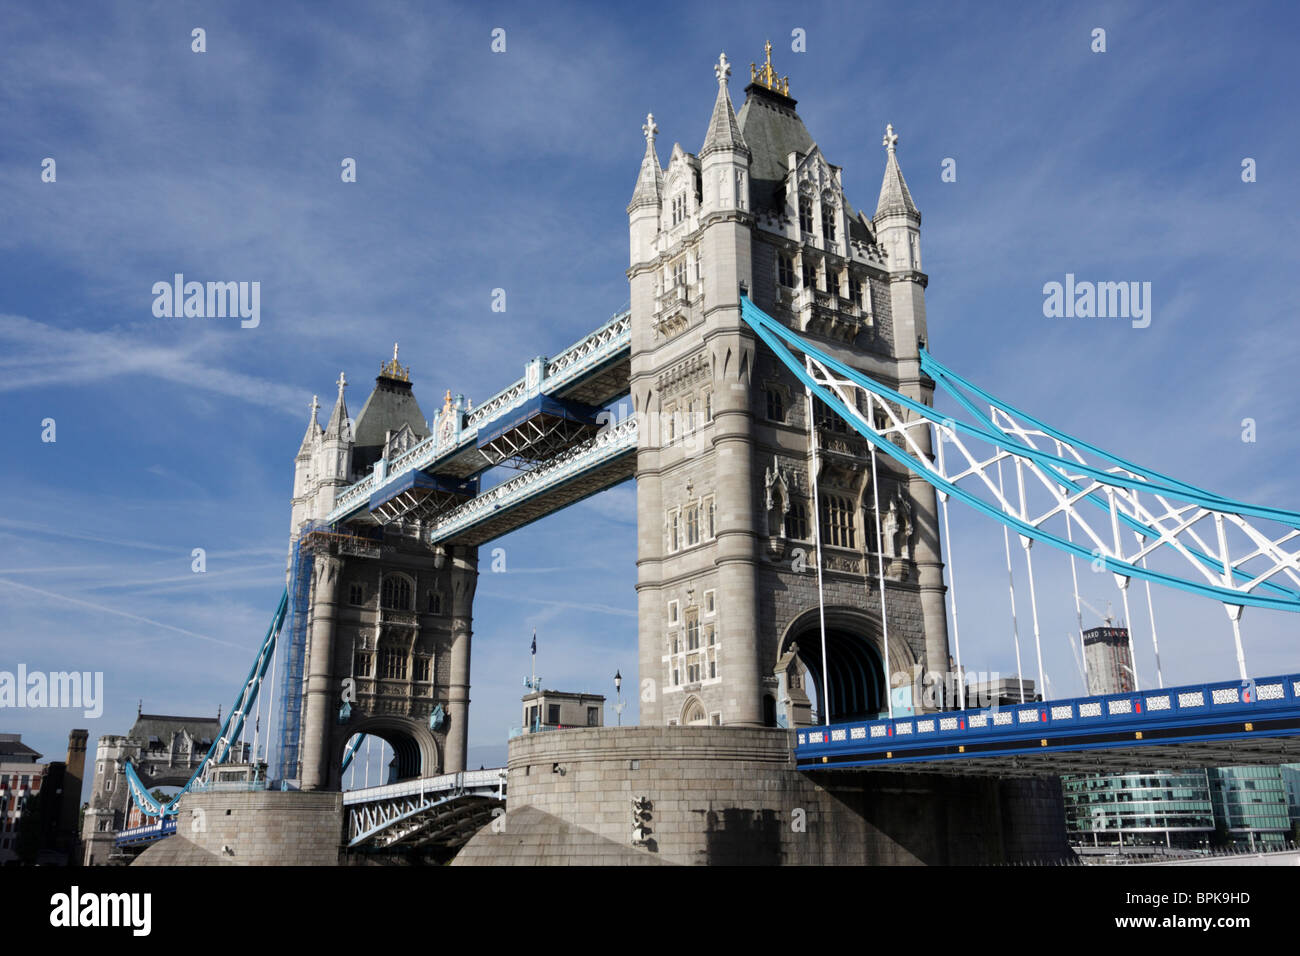 Low level angled aspect of the iconic Tower Bridge in London. One of the most photographed Victorian structures in the world. Stock Photo